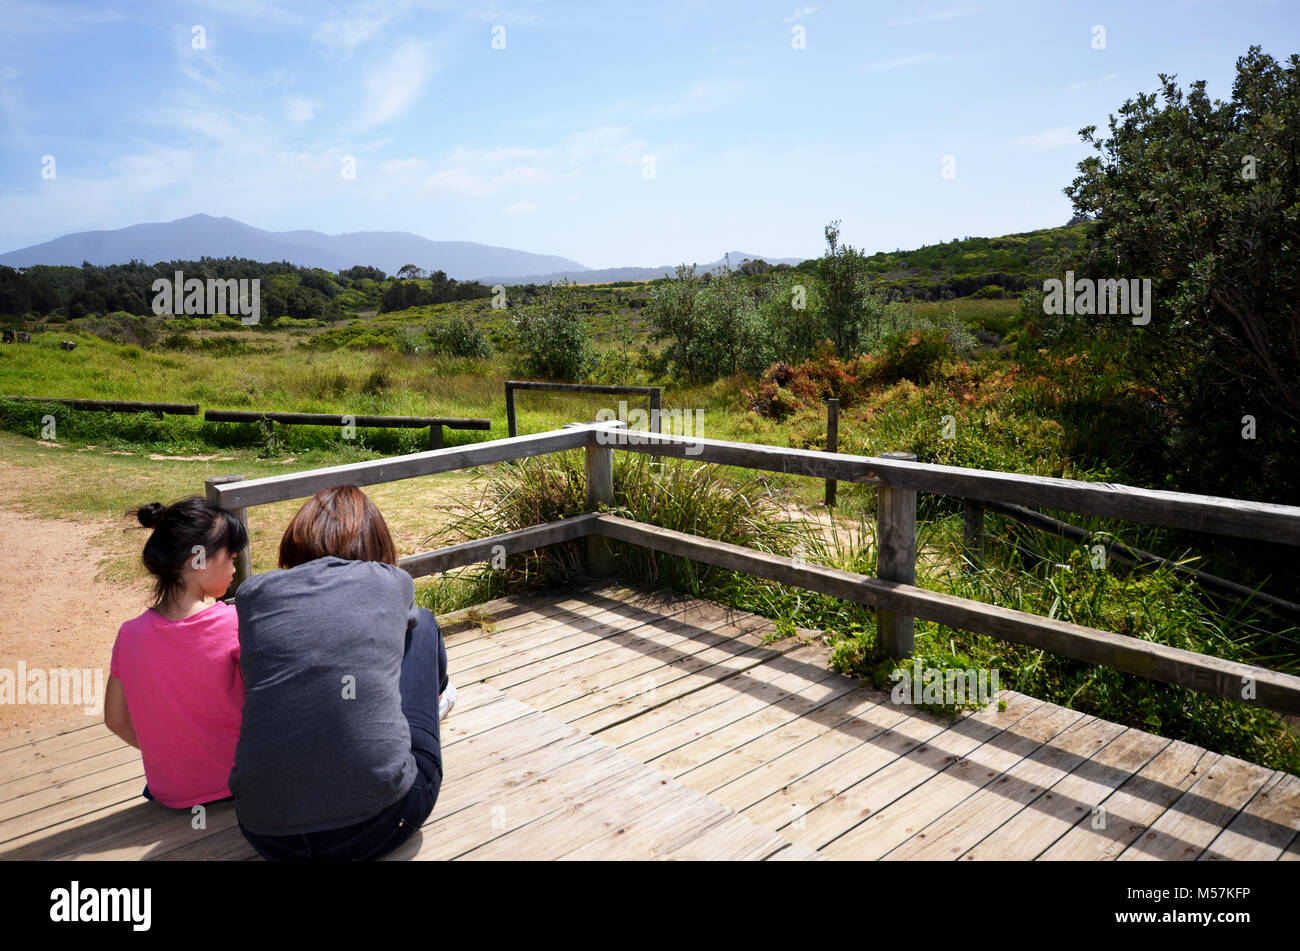 Mother and daughter sitting at viewing area with beautiful landscape in background Stock Photo